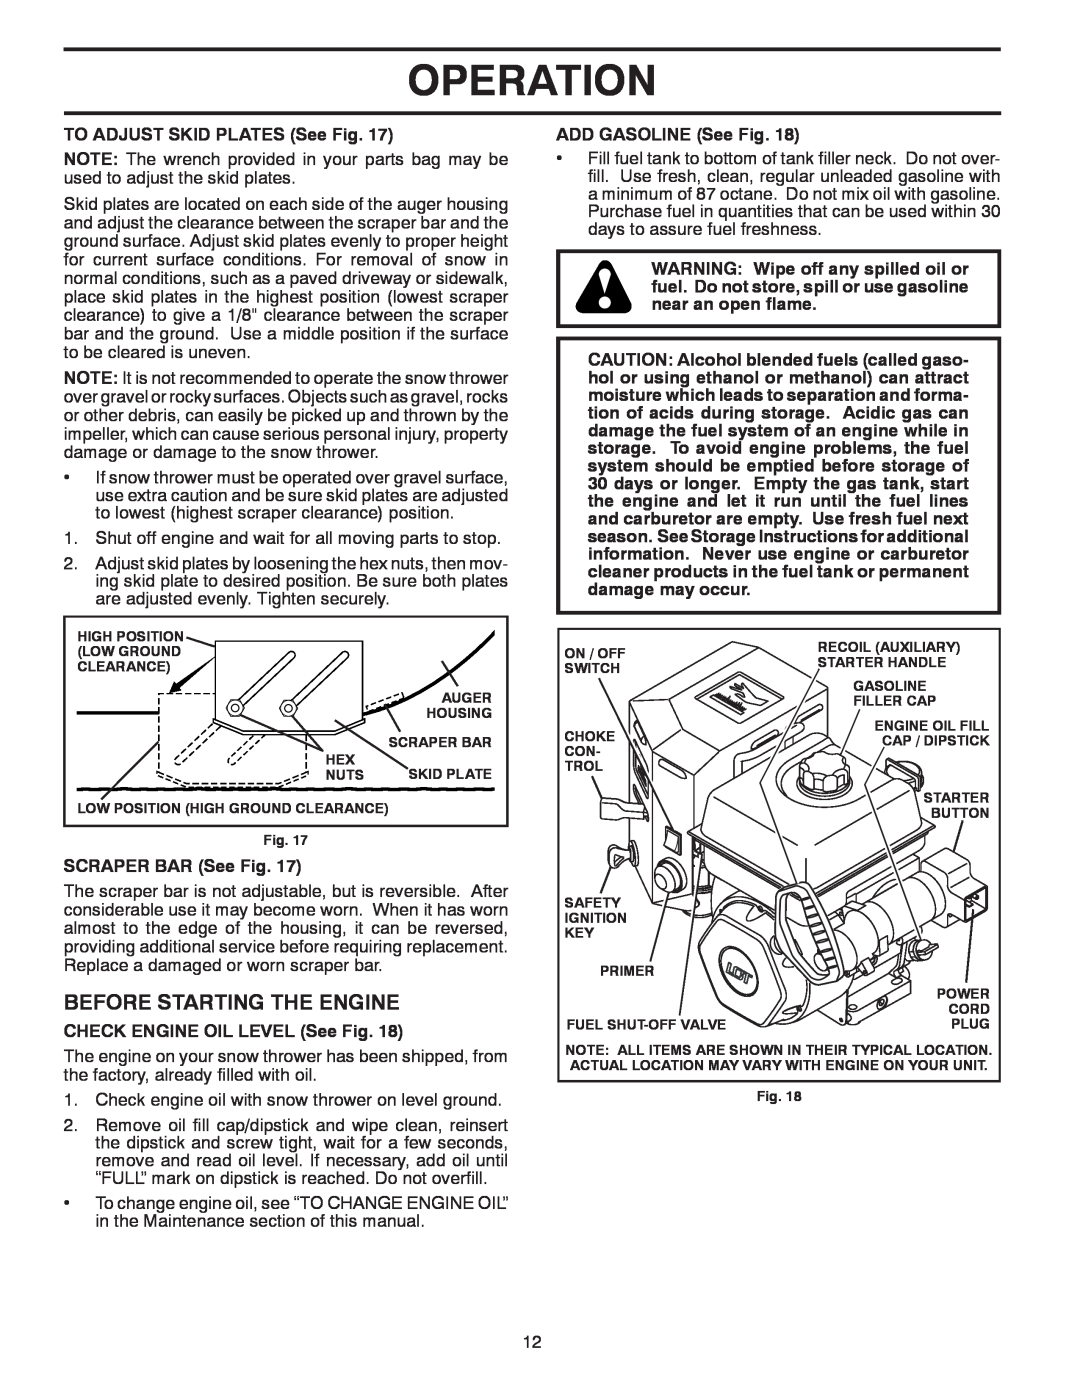 Poulan 429956, 96198002701 Before Starting The Engine, Operation, TO ADJUST SKID PLATES See Fig, SCRAPER BAR See Fig 